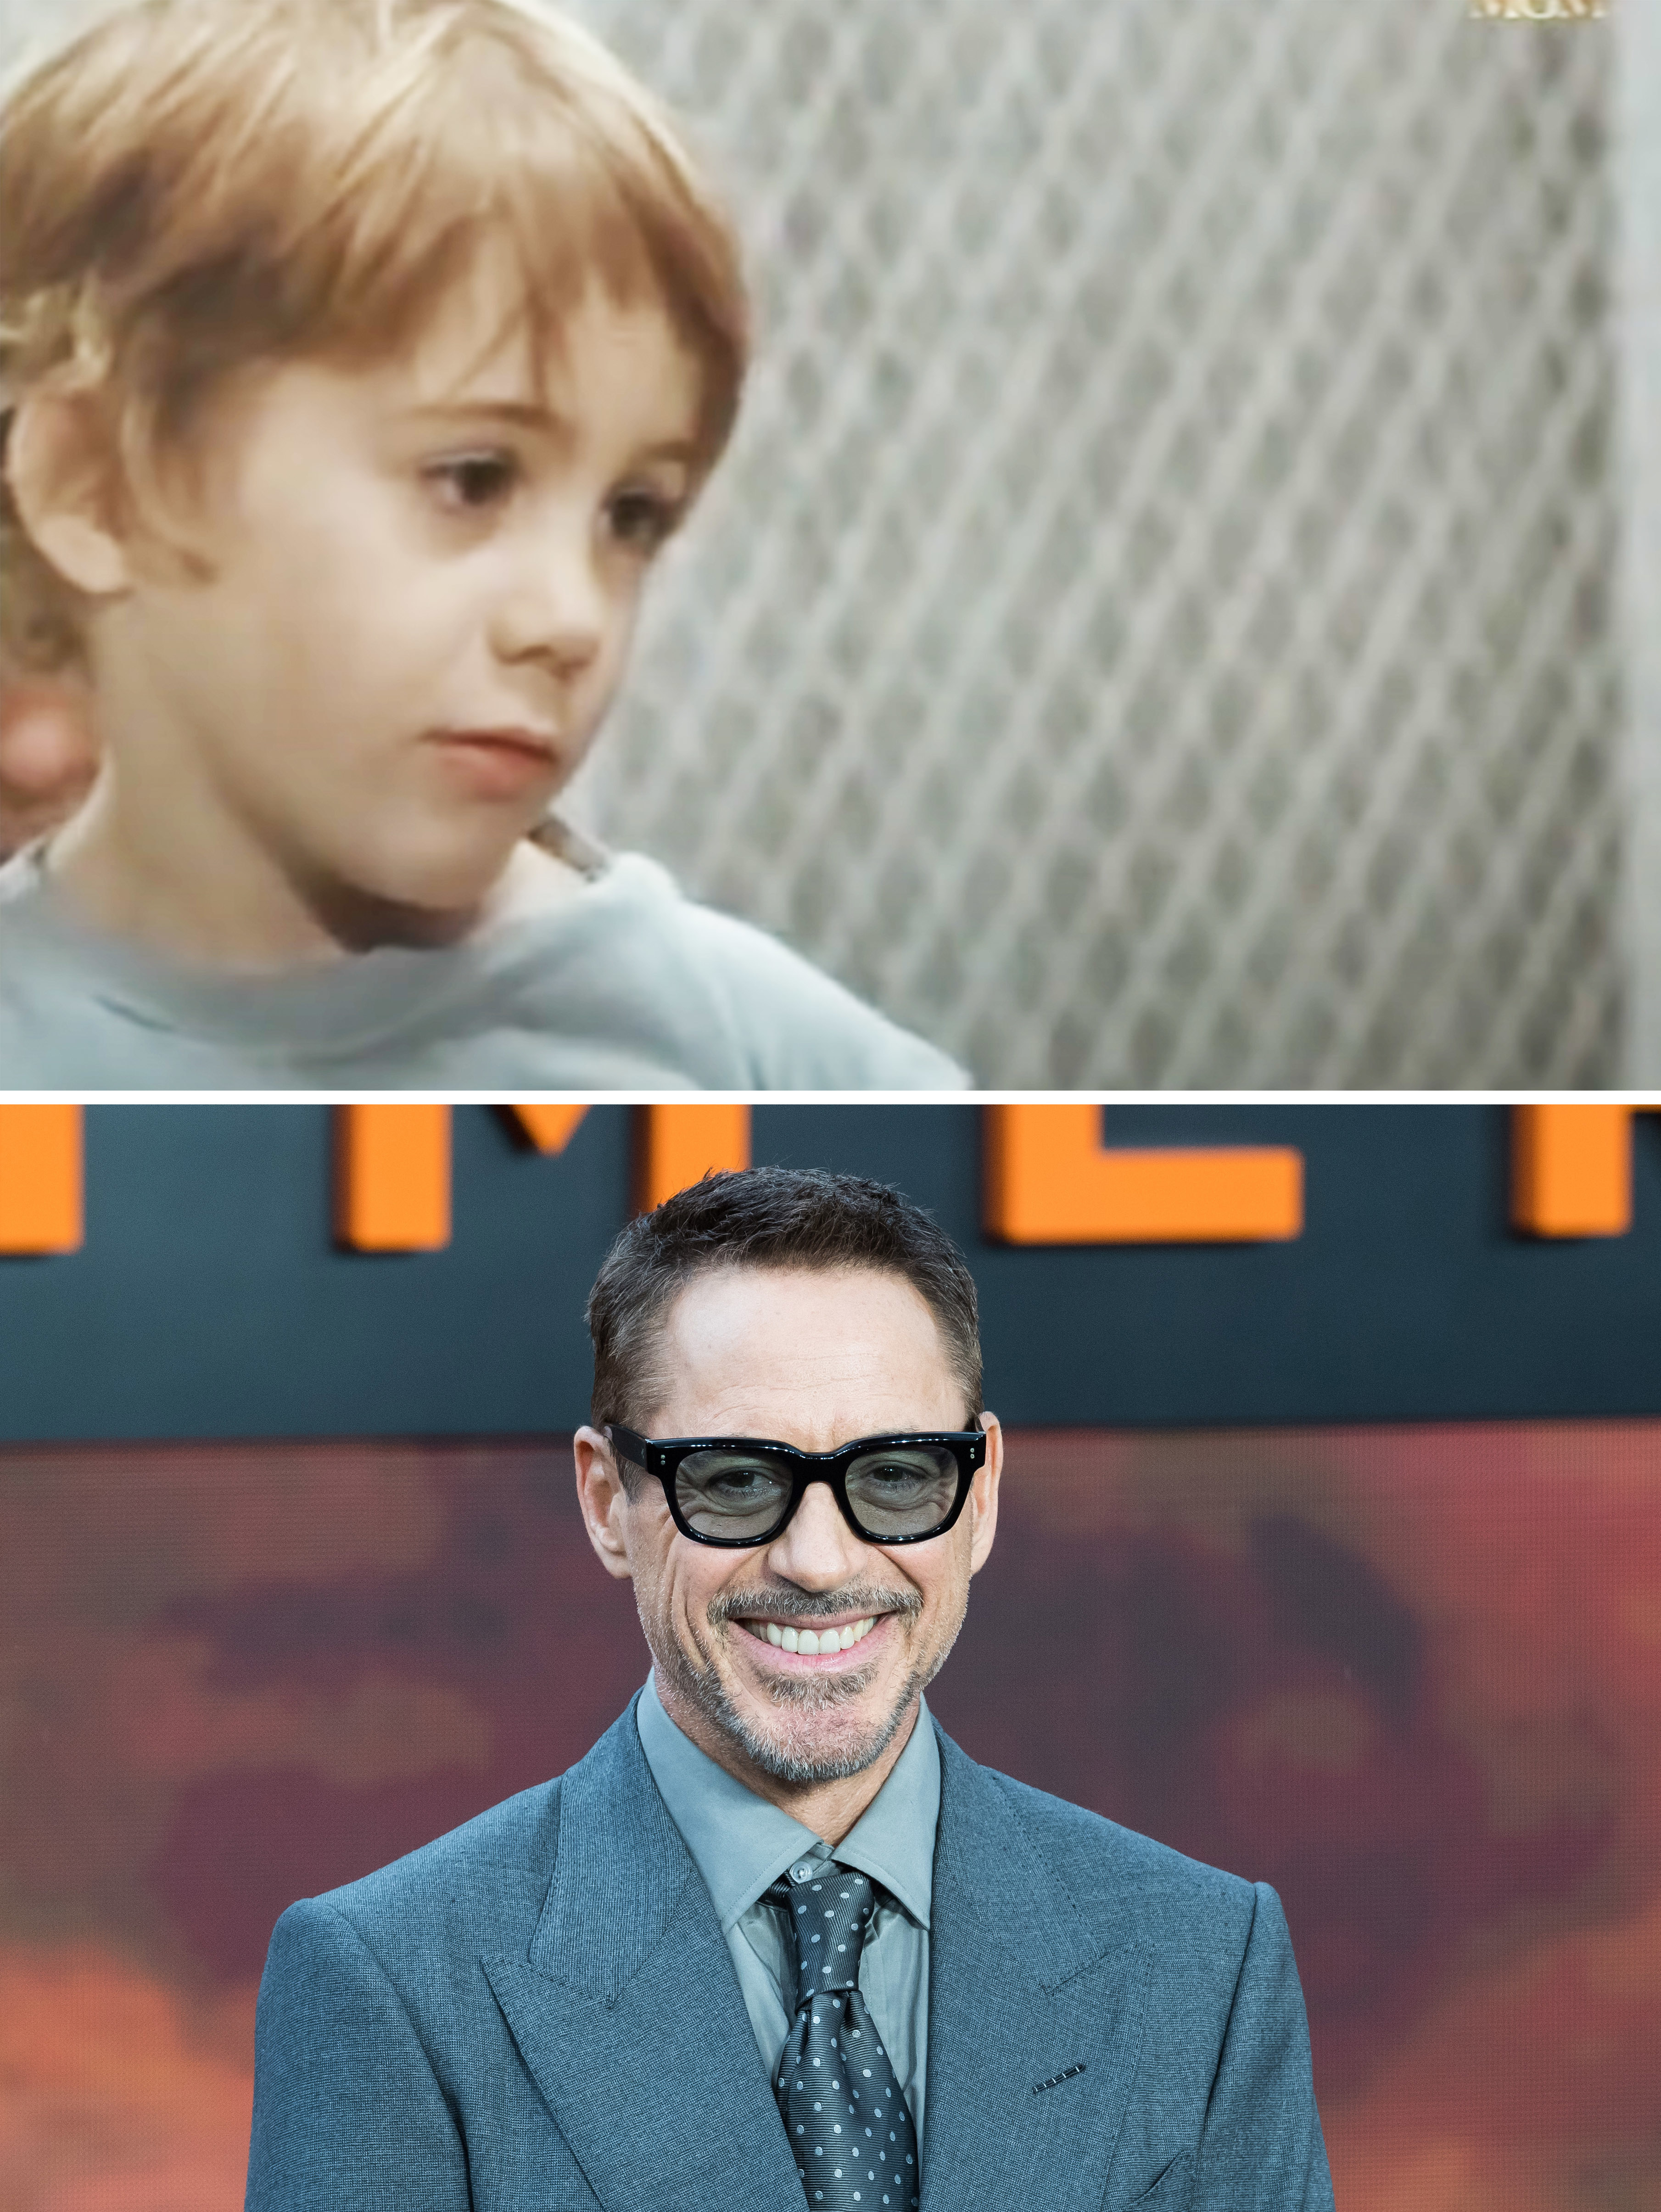 As a child in a scene from the movie and in a close-up at a media event